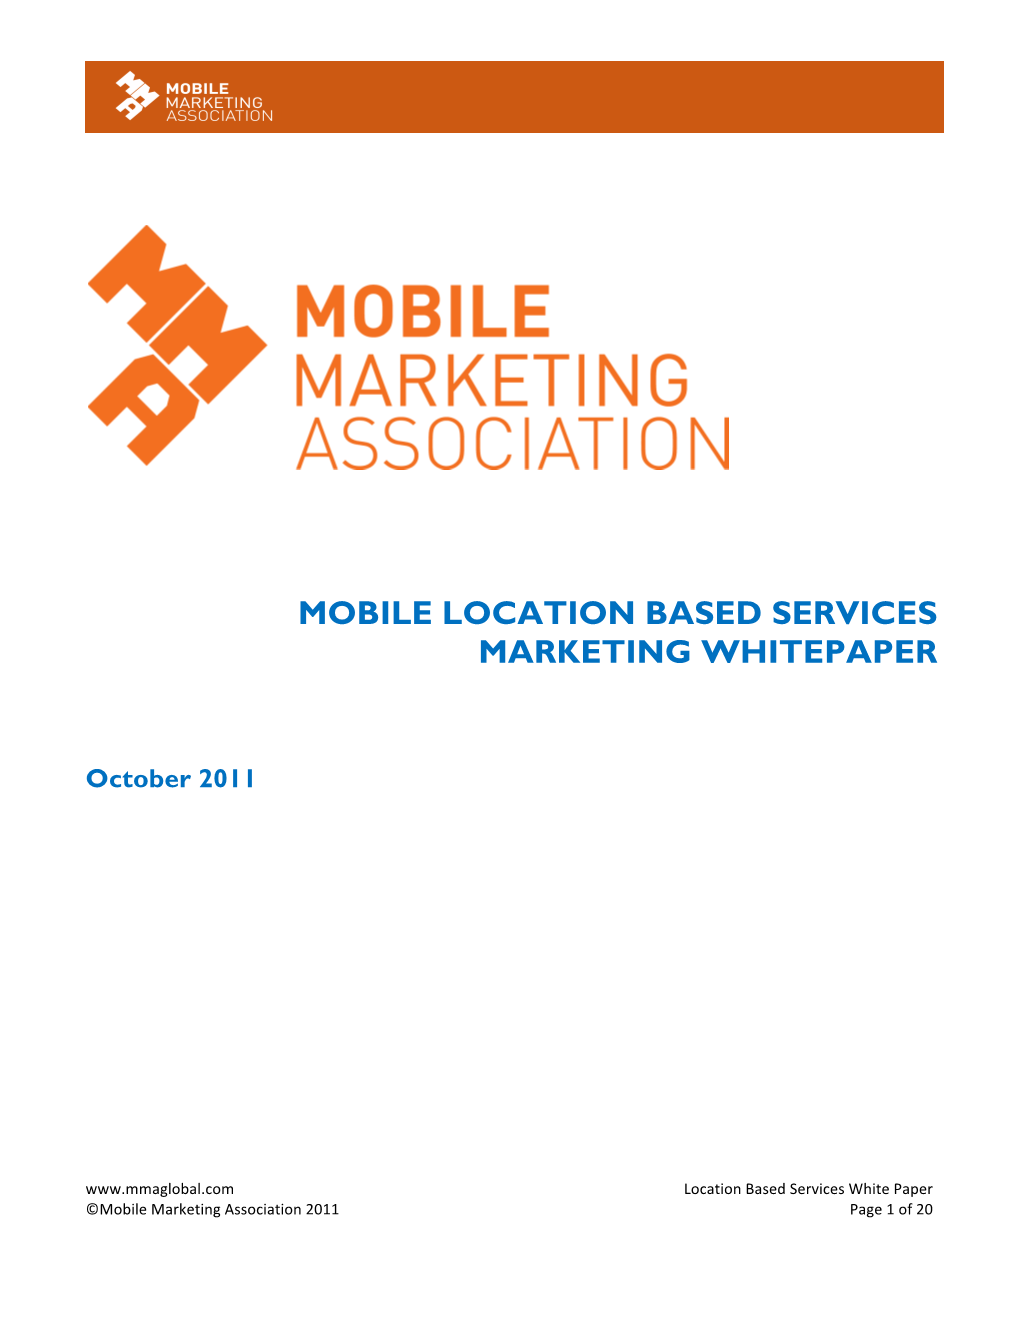 Mobile Location Based Services Marketing Whitepaper